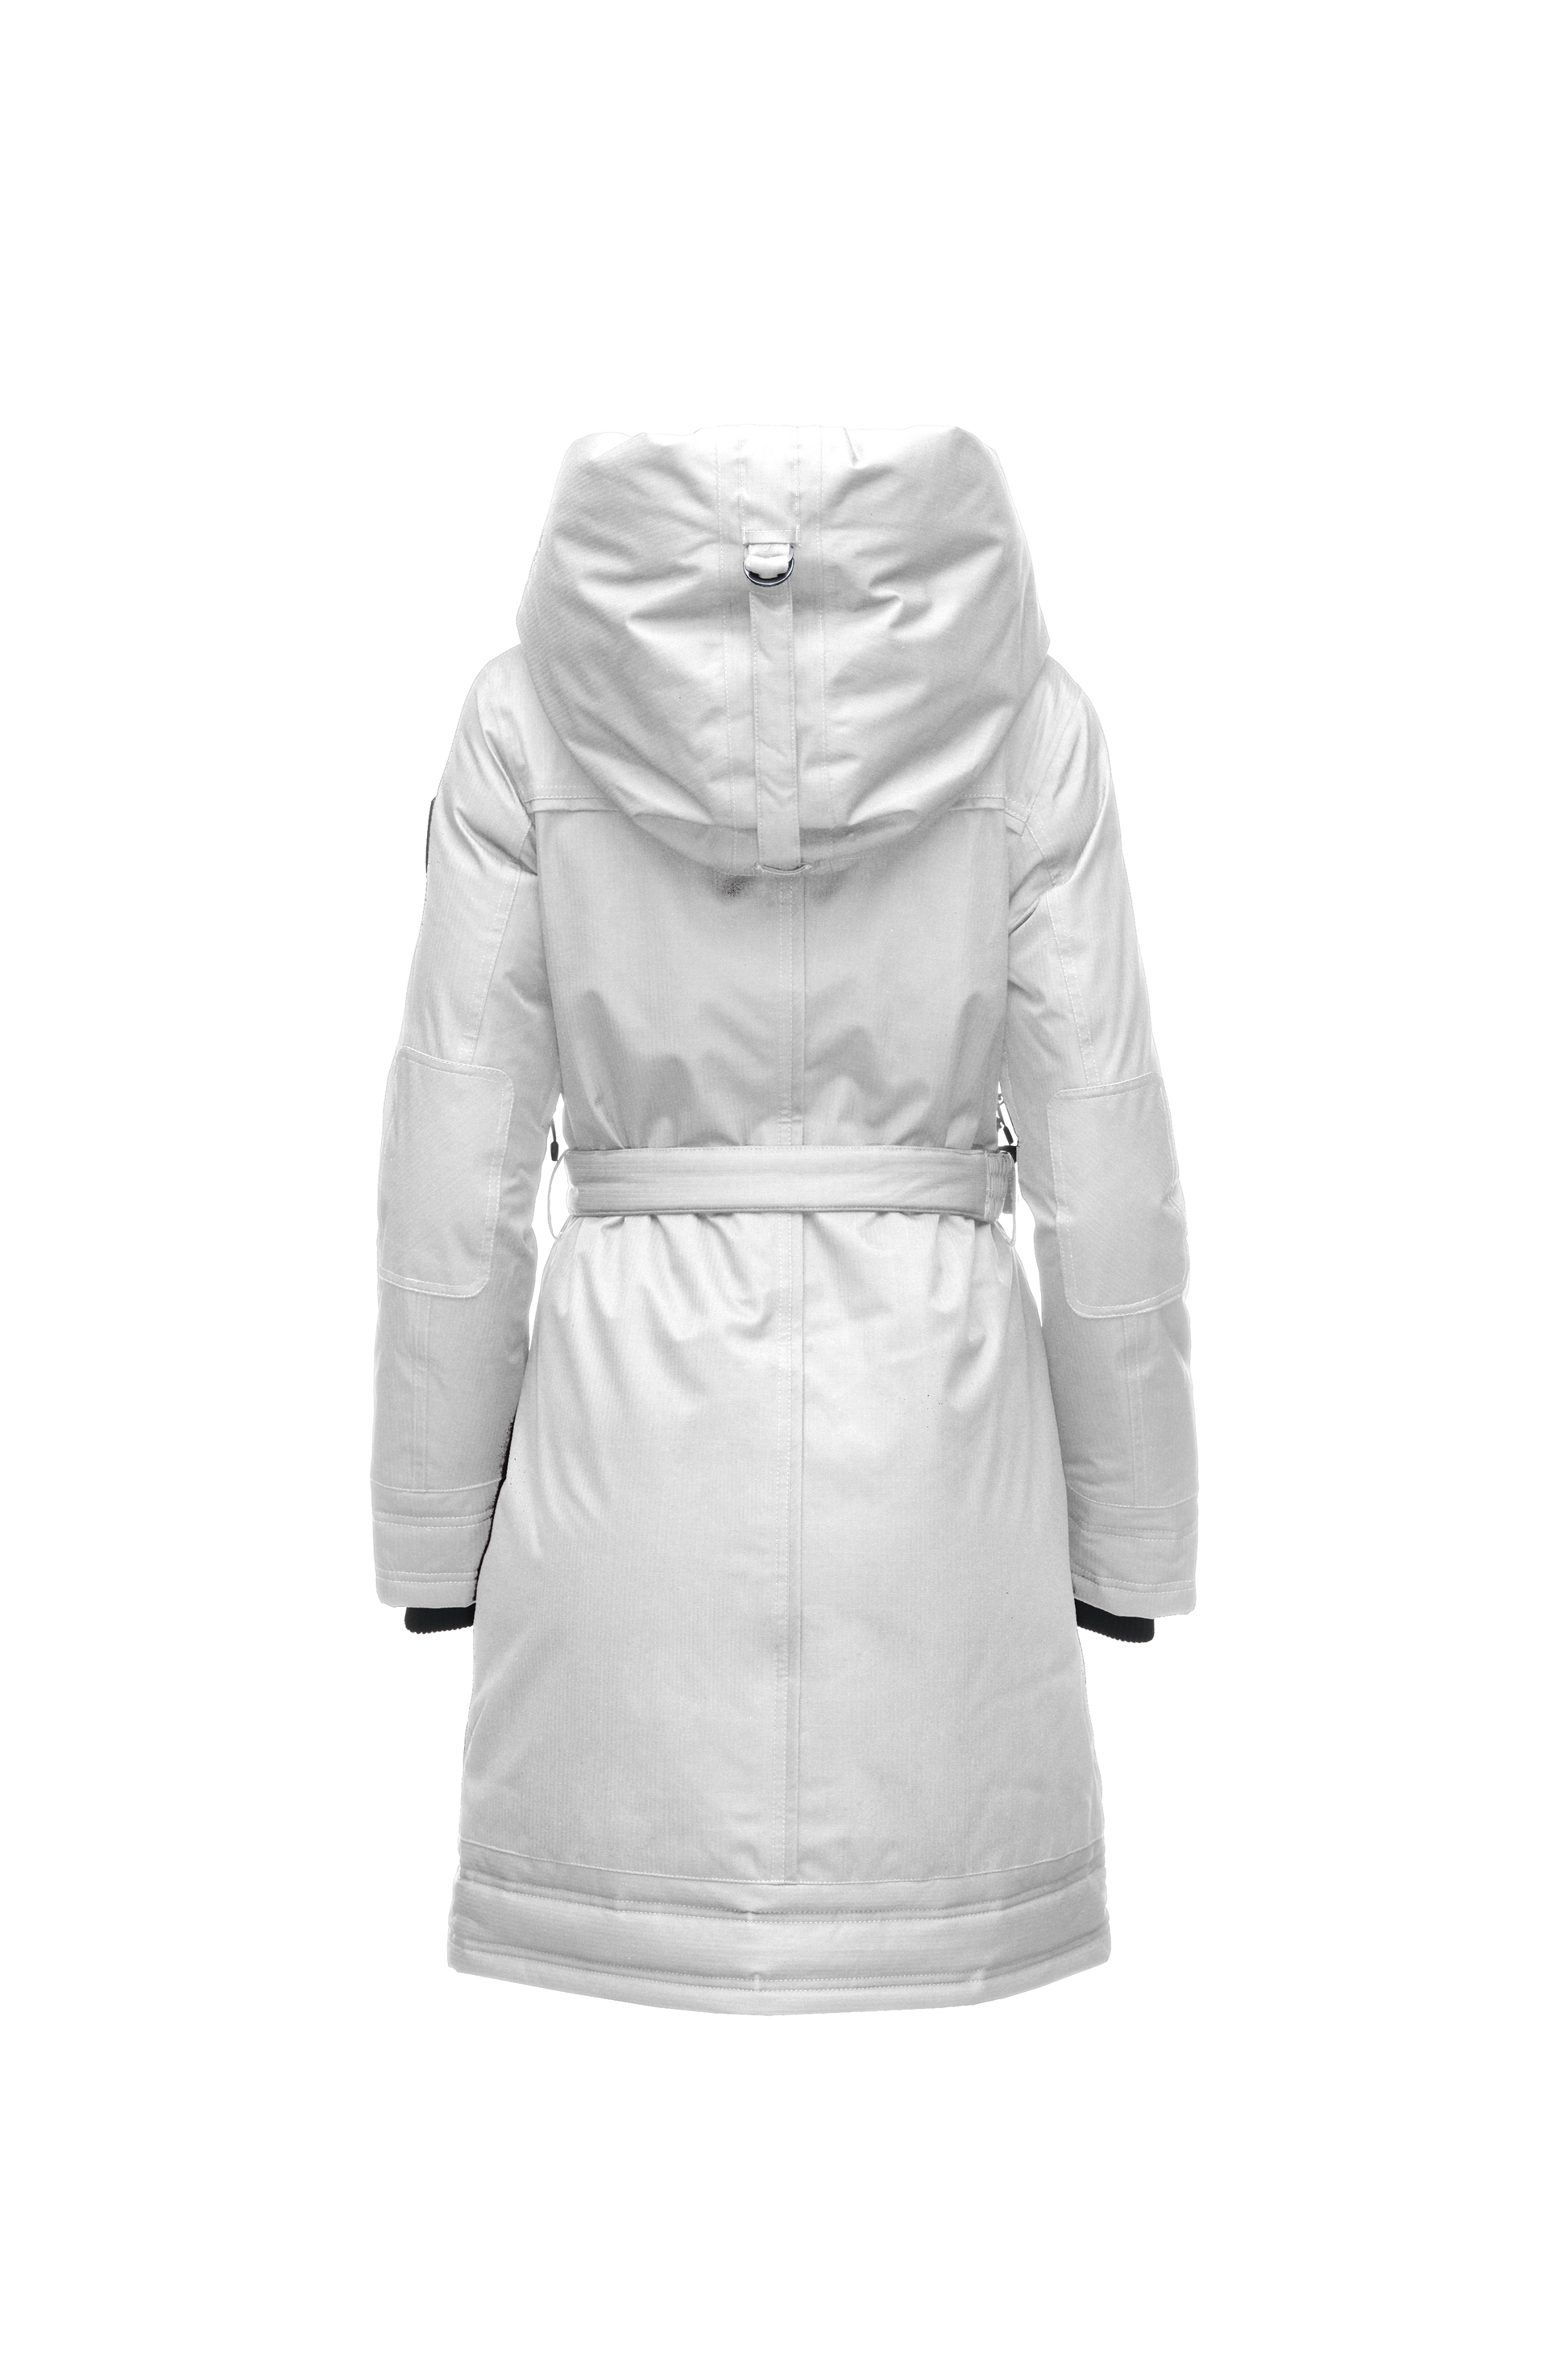 Women's Thigh length own parka with a furless oversized hood in CH Light Grey